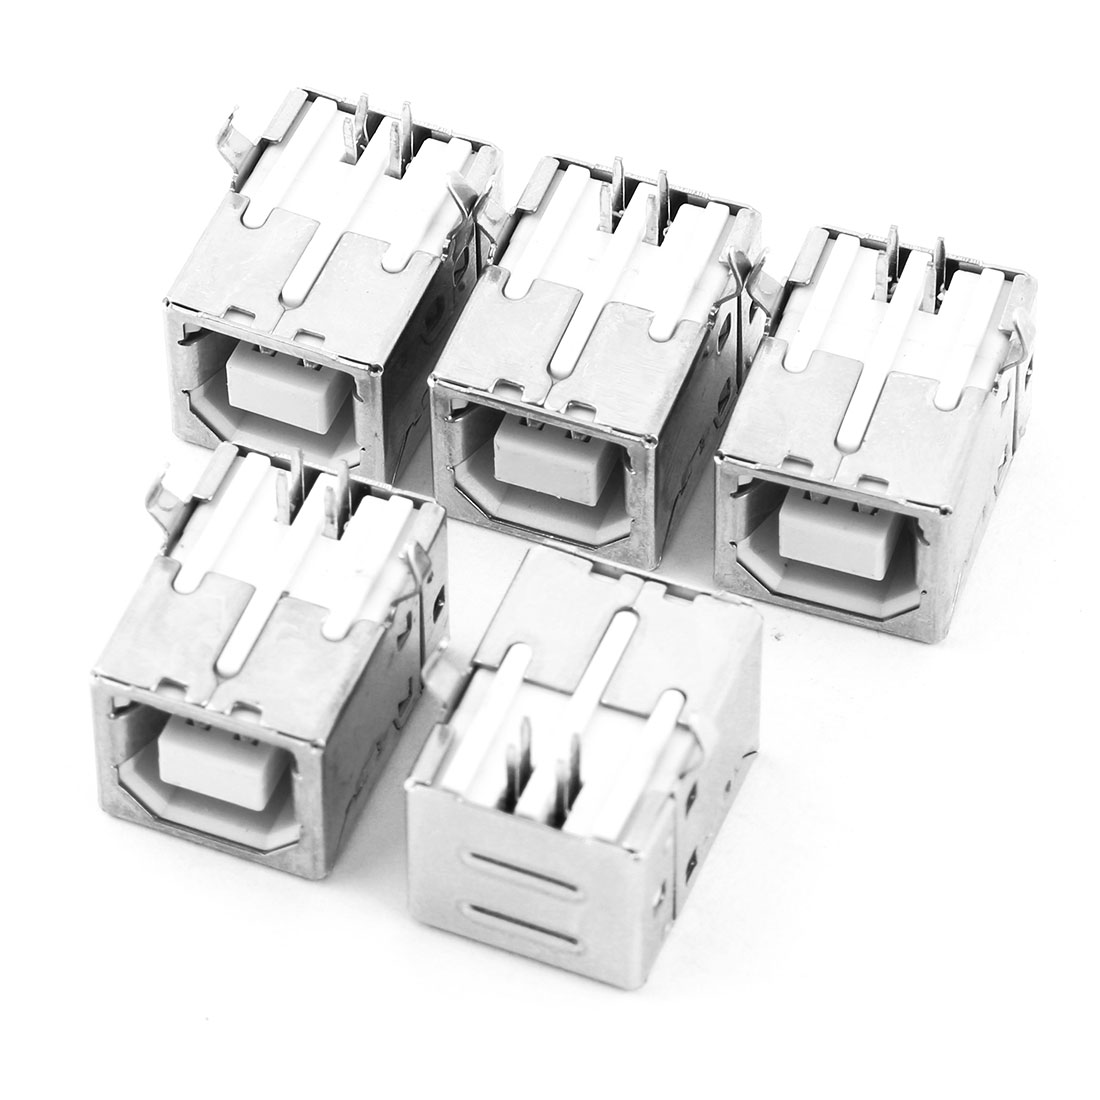 Cables 10pcs DIY USB 2.0 A Female Plug Socket Connector & Plastic Cover USB Plug Adapter USB Connector USB Socket for DIY Black Occus Cable Length: Other 